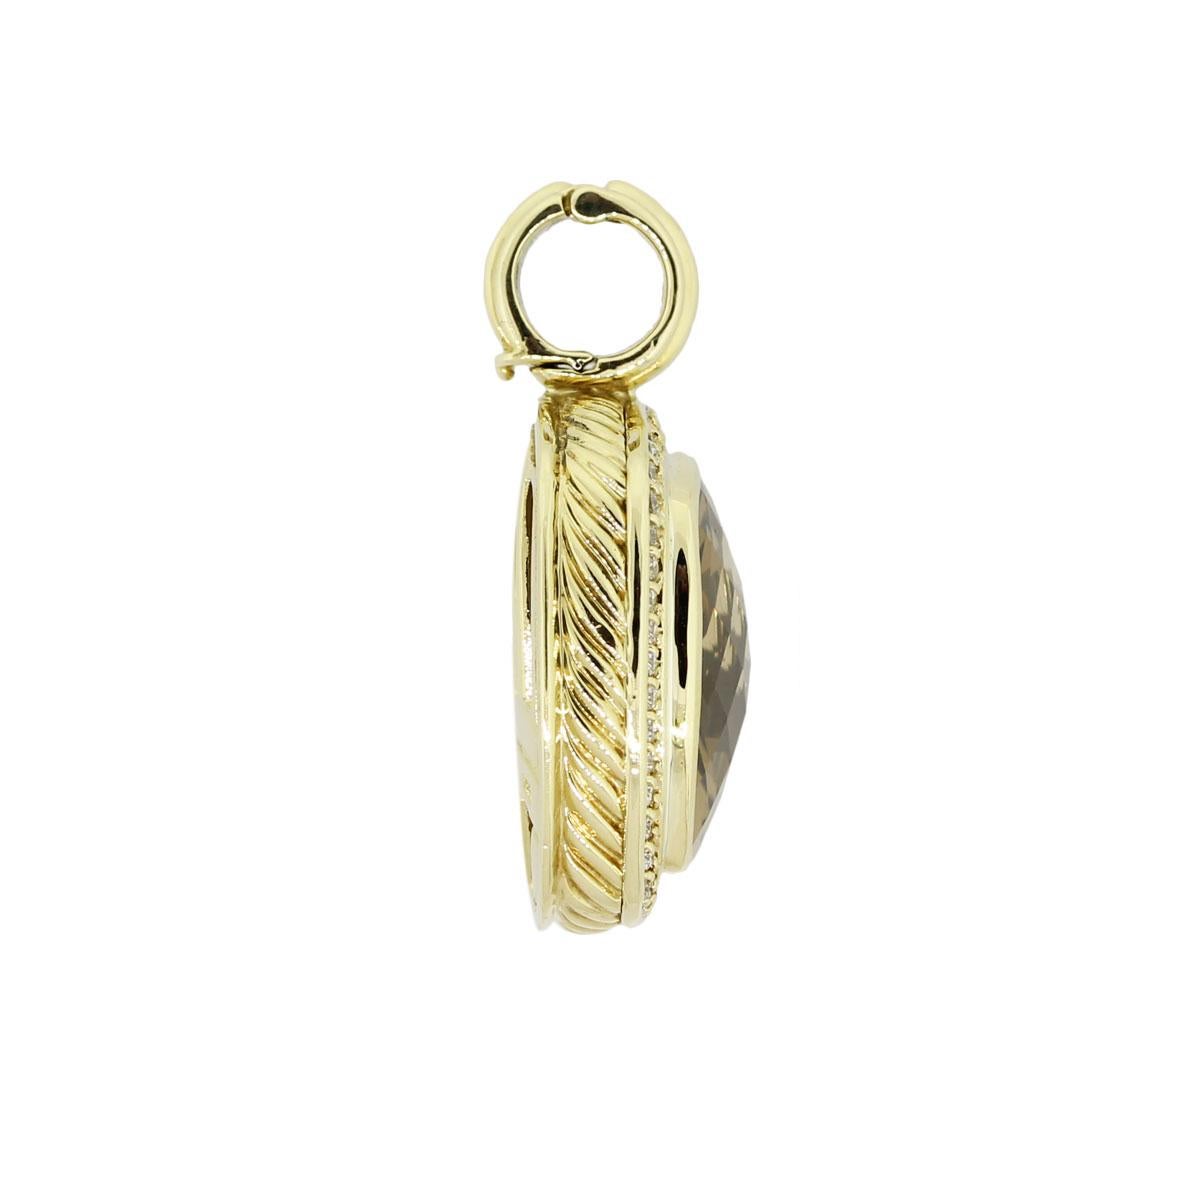 Designer: David Yurman
Material: 18k yellow gold
Diamond Details: Round brilliant diamonds. Diamonds are G/H in color and VS in clarity
Gemstone Details: Square shape citrine measuring approximately 0.77″ x 0.77″
Measurements: 1.50″ x 0.45″ x